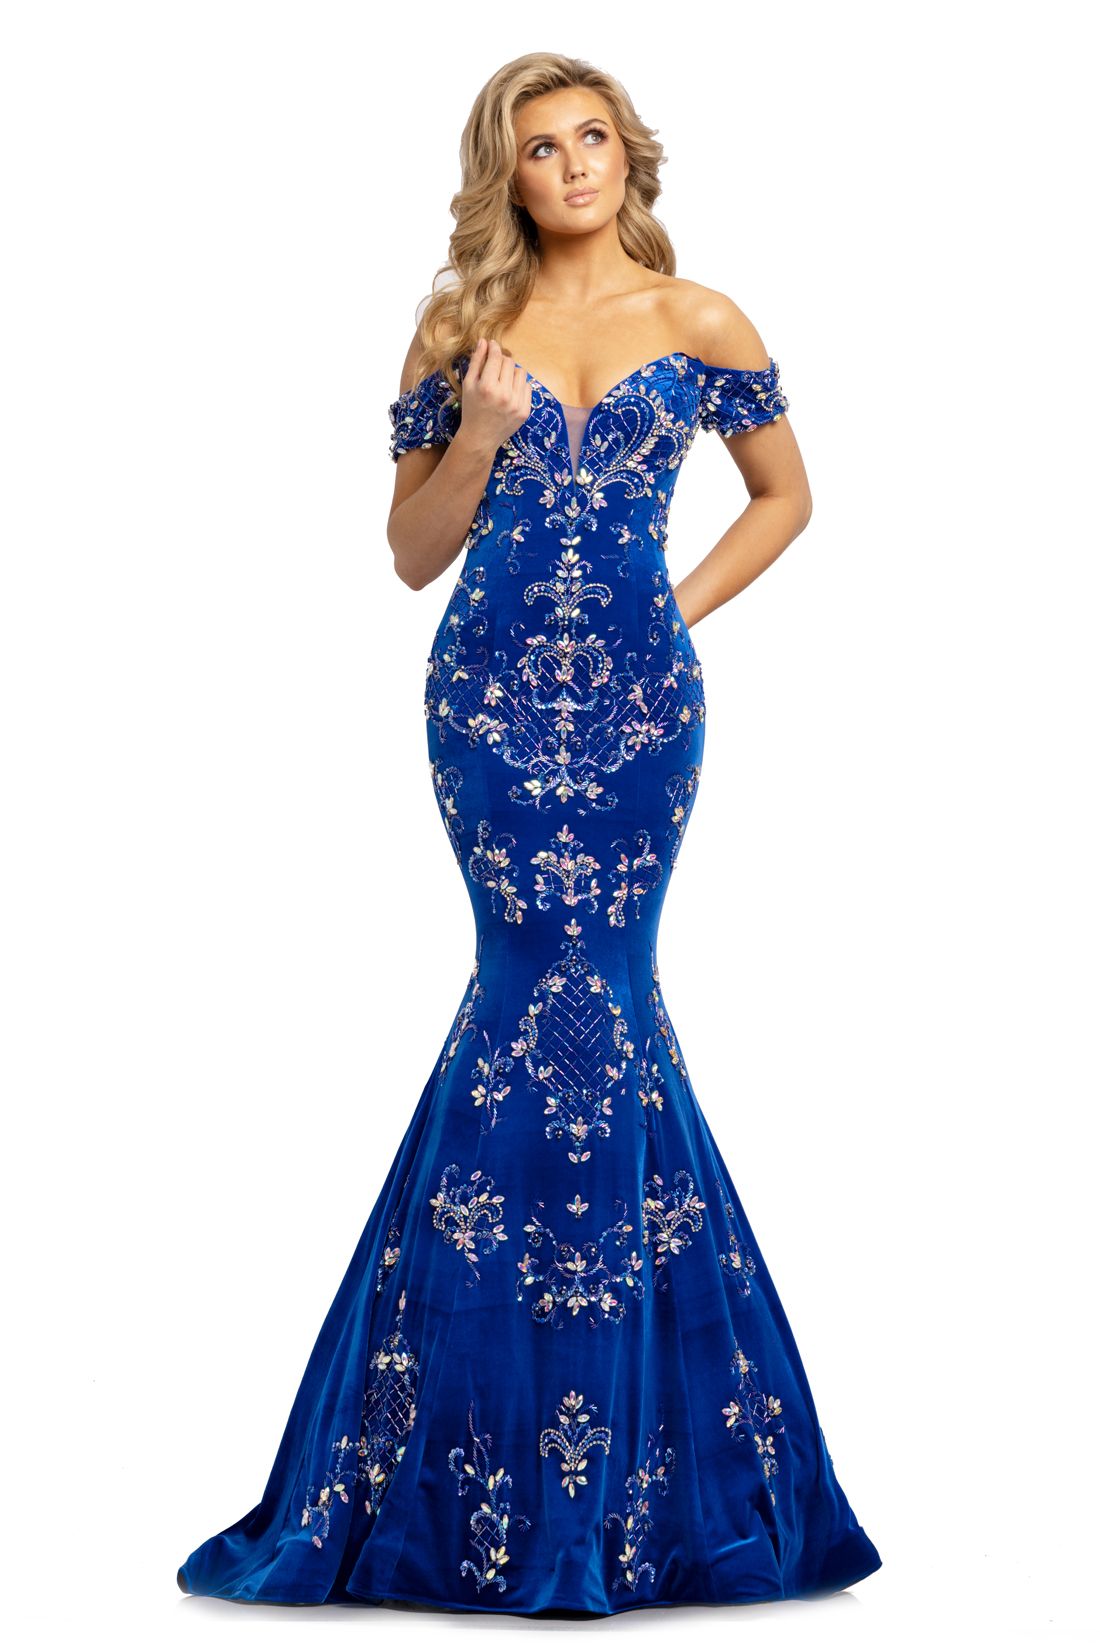 Johnathan Kayne 2176 is a long fit & Flare Mermaid Silhouette Crushed Velvet Formal Evening Gown. This Pageant Dress Features Crystal embellished off the Shoulder sleeves and a sweetheart Plunging neckline. Lush Trumpet skirt with sweeping train. Bodice is embellished with hand beading and crystal rhinestones. Prom Dress Evening Gown   Available Colors: Periwinkle, Royal, Black  Available Sizes: 0-16